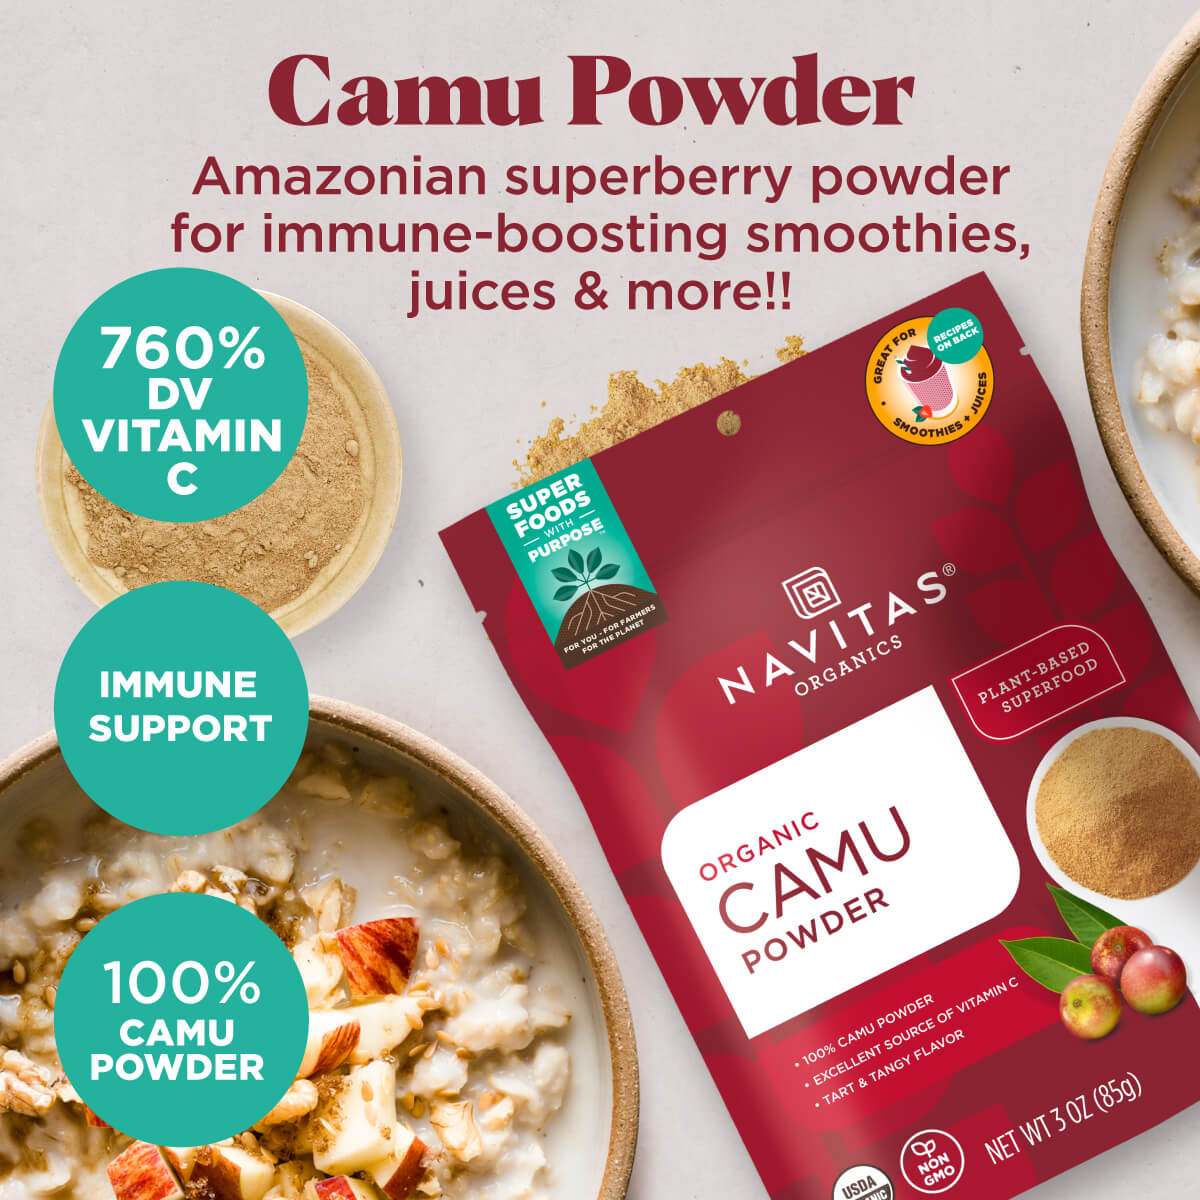 Navitas Organics Camu Powder is an Amazonian superberry powder for immune-boosting smoothies, juices & more!!